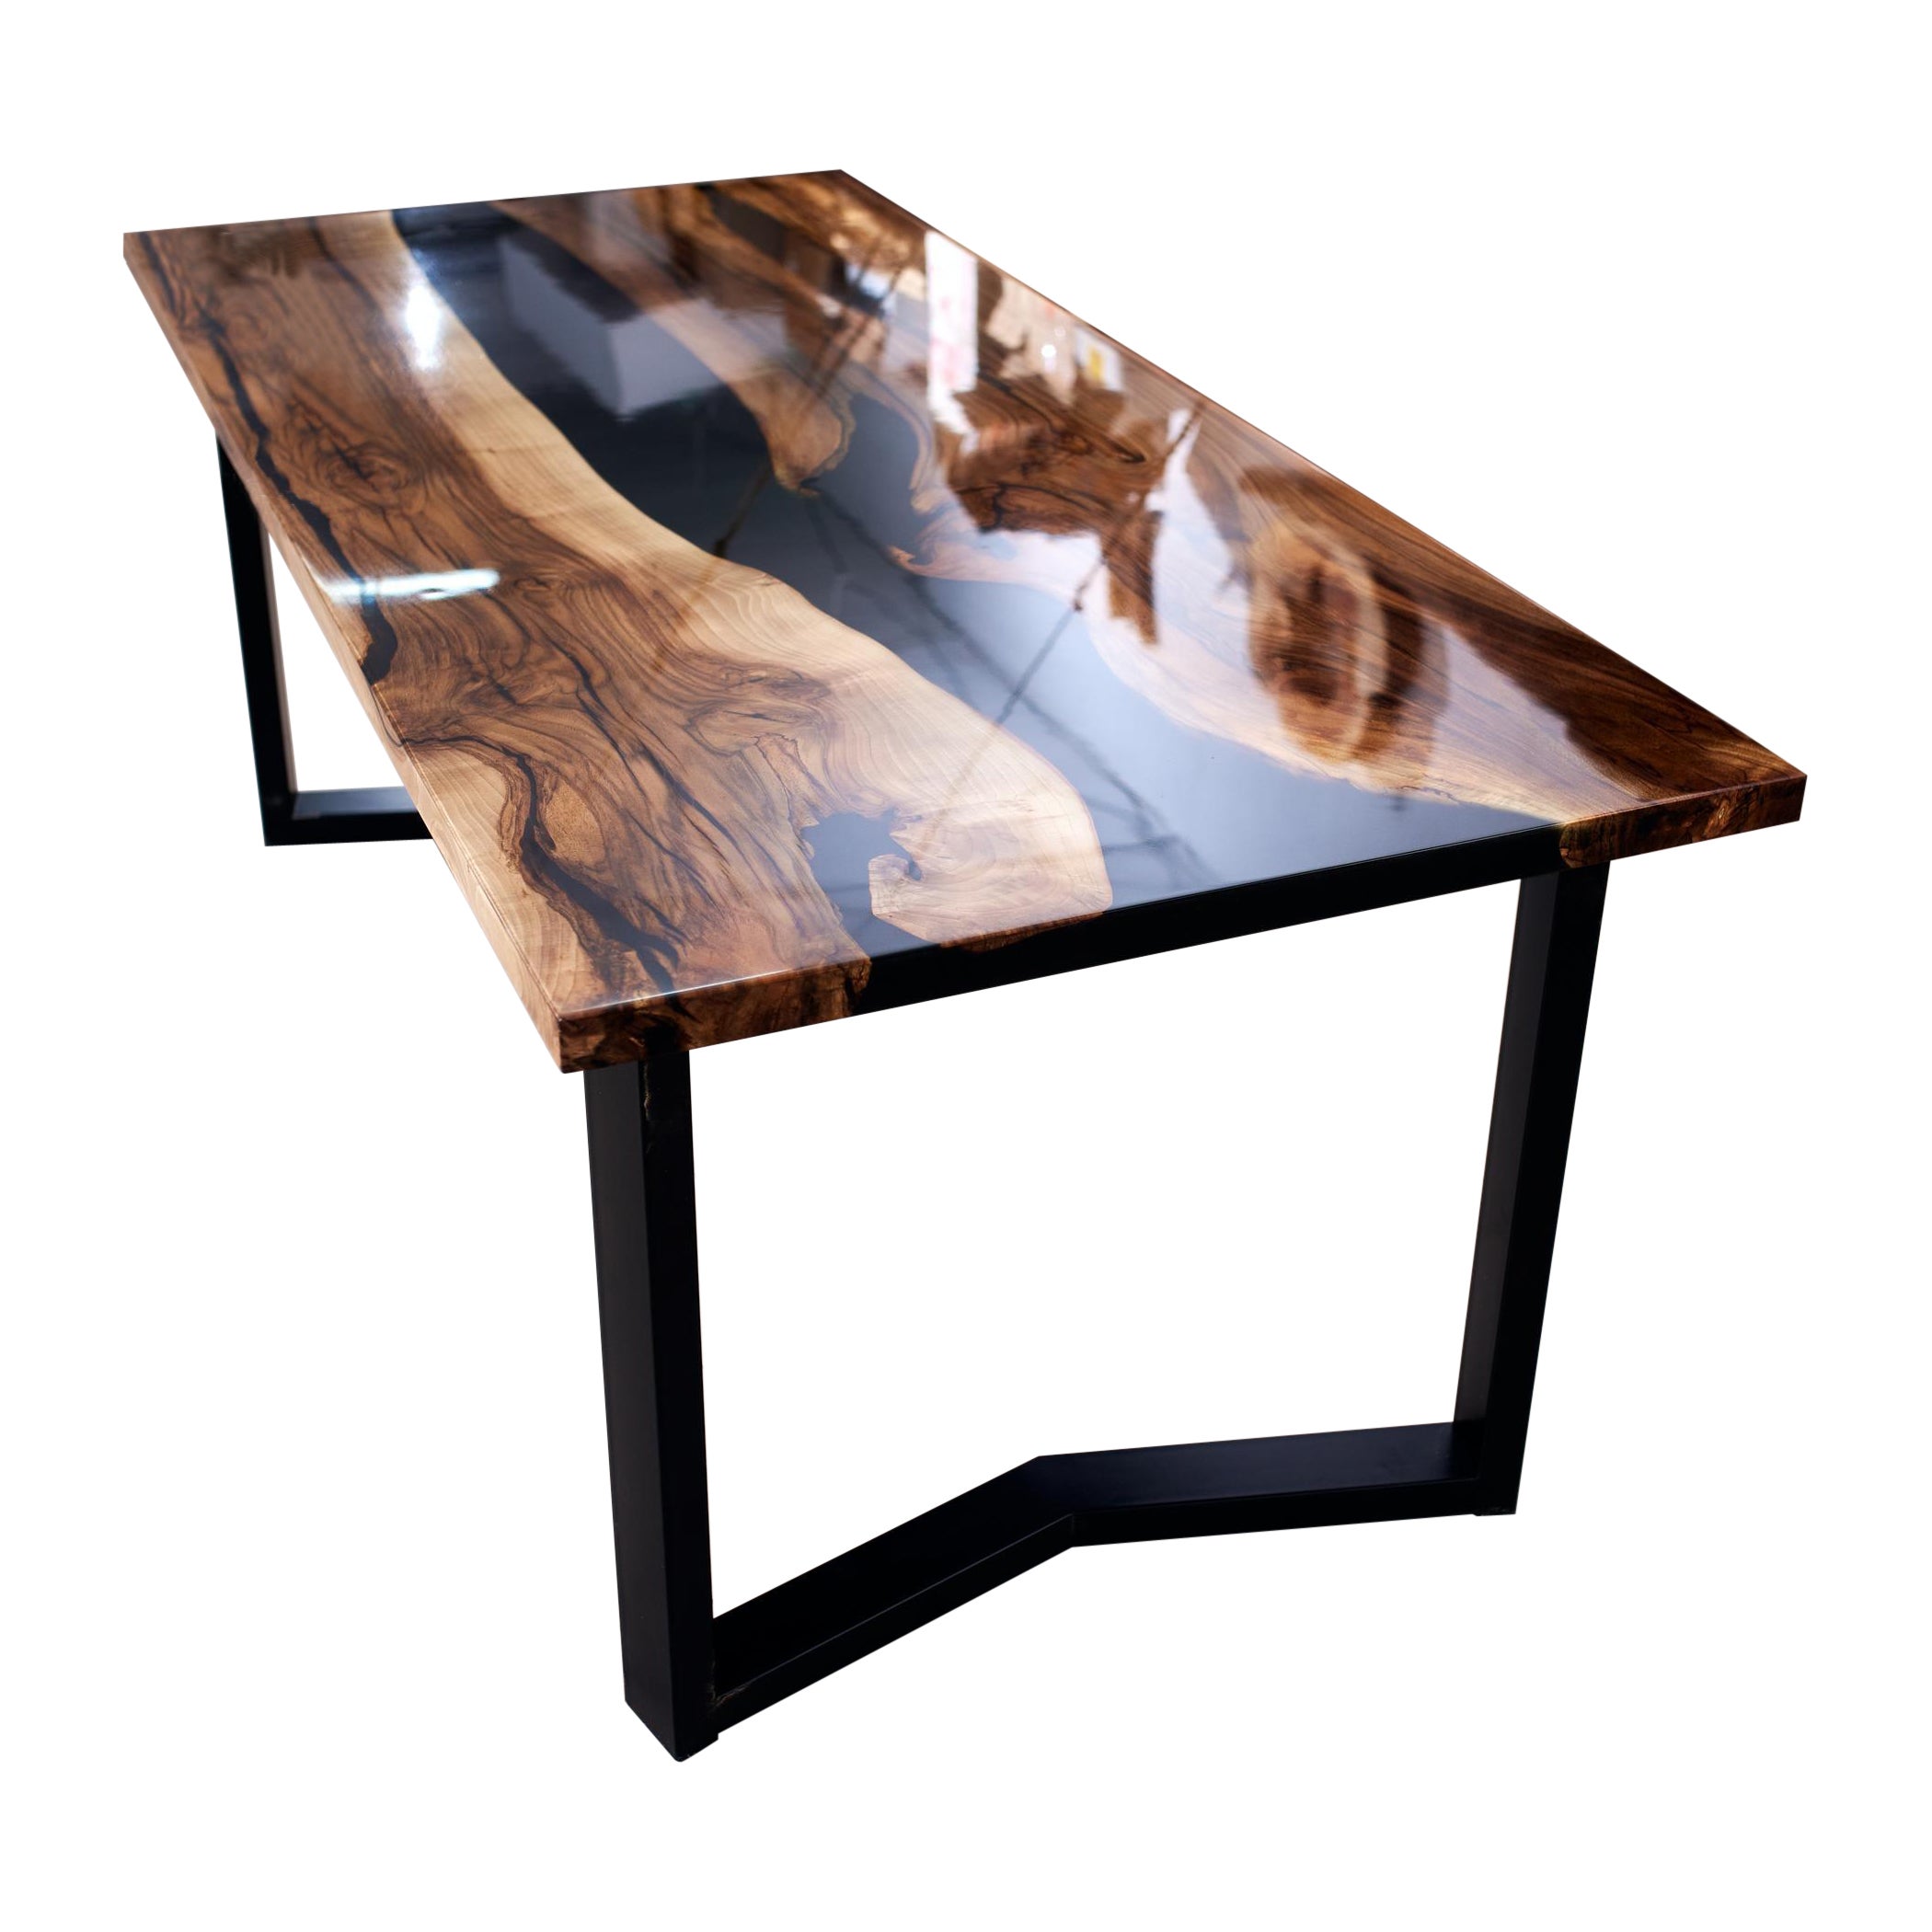 The Sorrow
Ancient slabs of rotten walnut shrouded in the darkness of black epoxy. Every crack and every authentic feature of the old wood is accentuated with pitch black as darkness itself. The table turned out with its own special character. I am